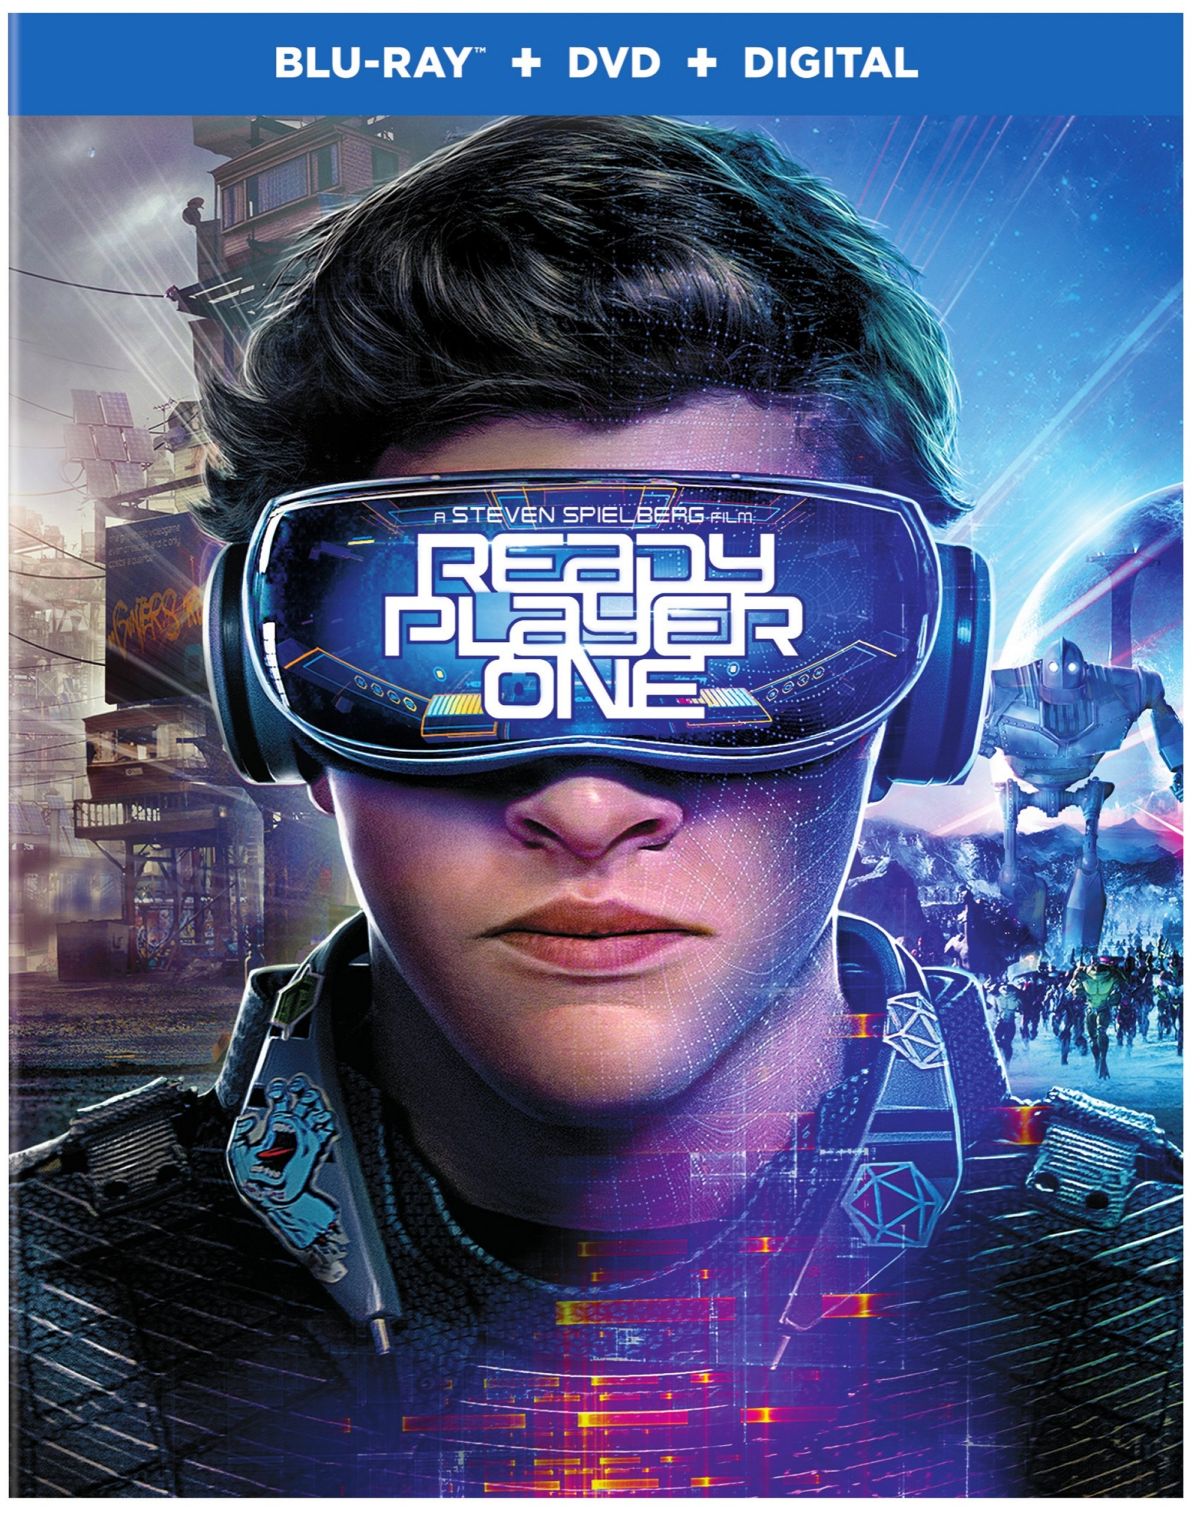 Ready Player One LIVE at SXSW, powered by Twitch and IMDb